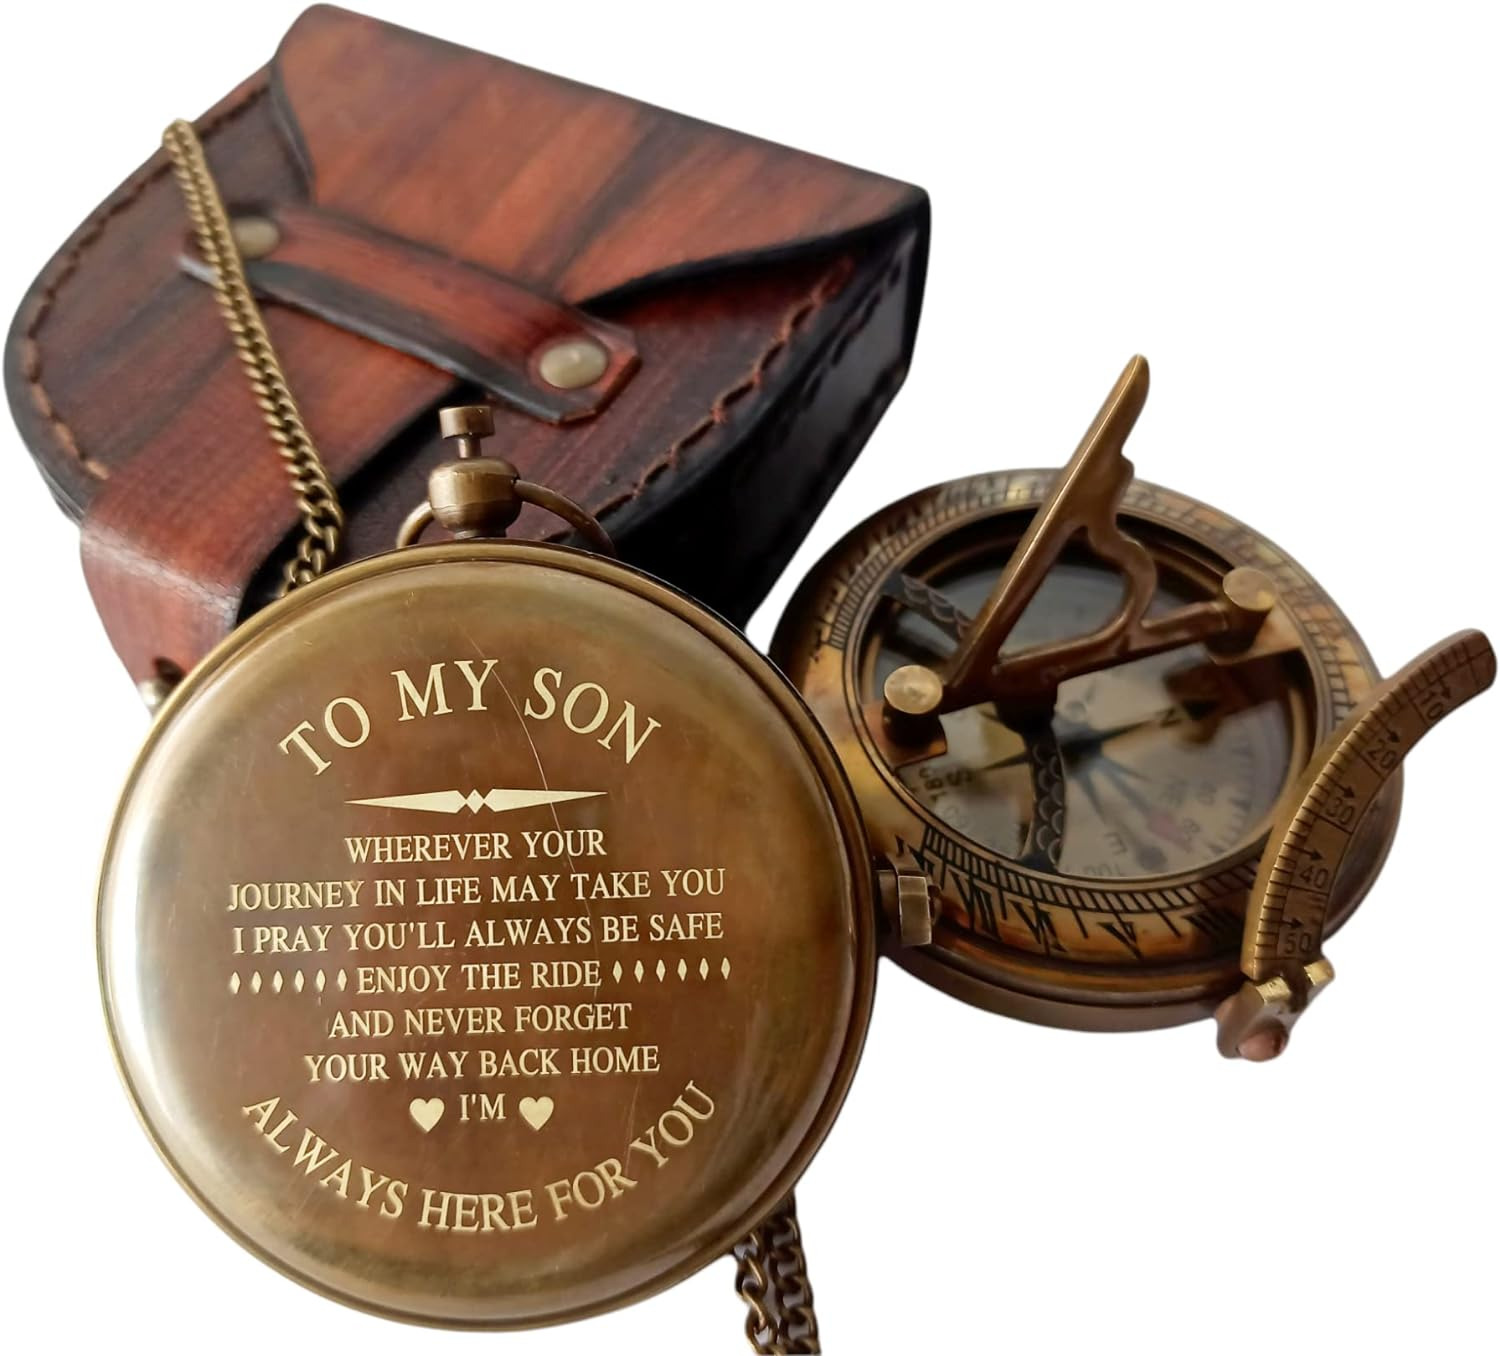 To My Son Compass Personalized Sundial Compass with Leather Case/Gift